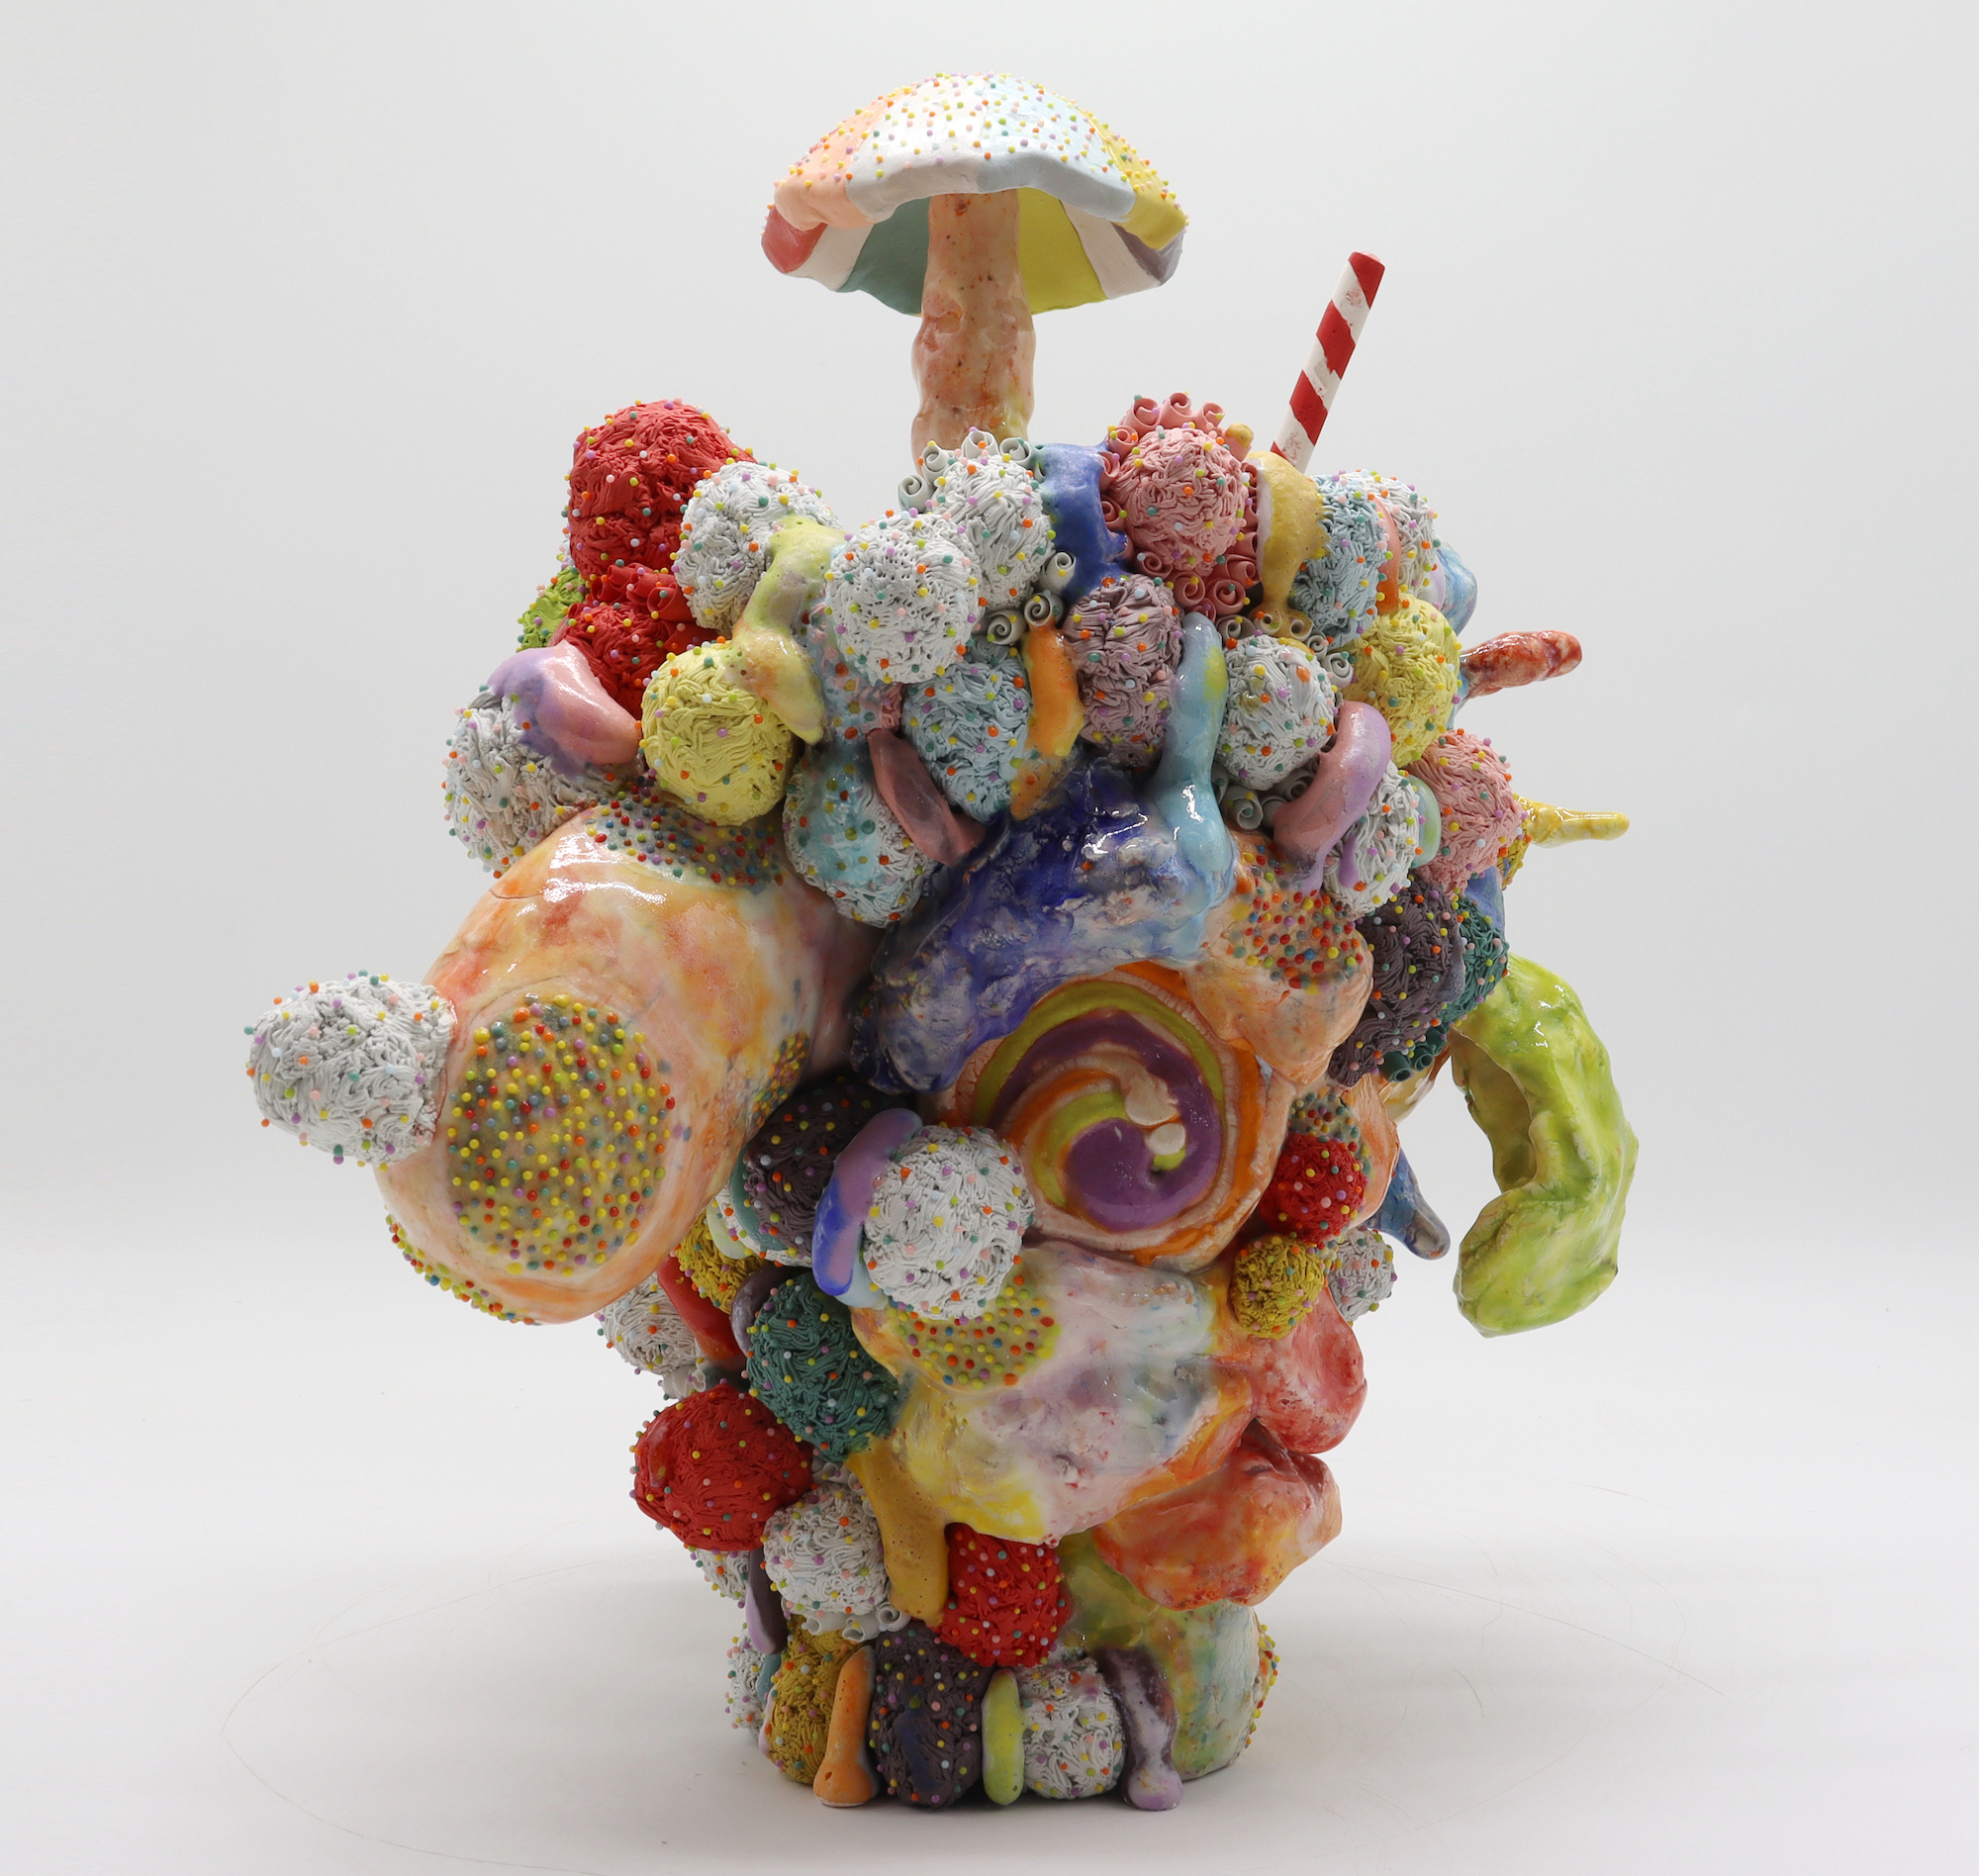 An abstract ceramic sculpture that evokes an ice cream with sprinkles.